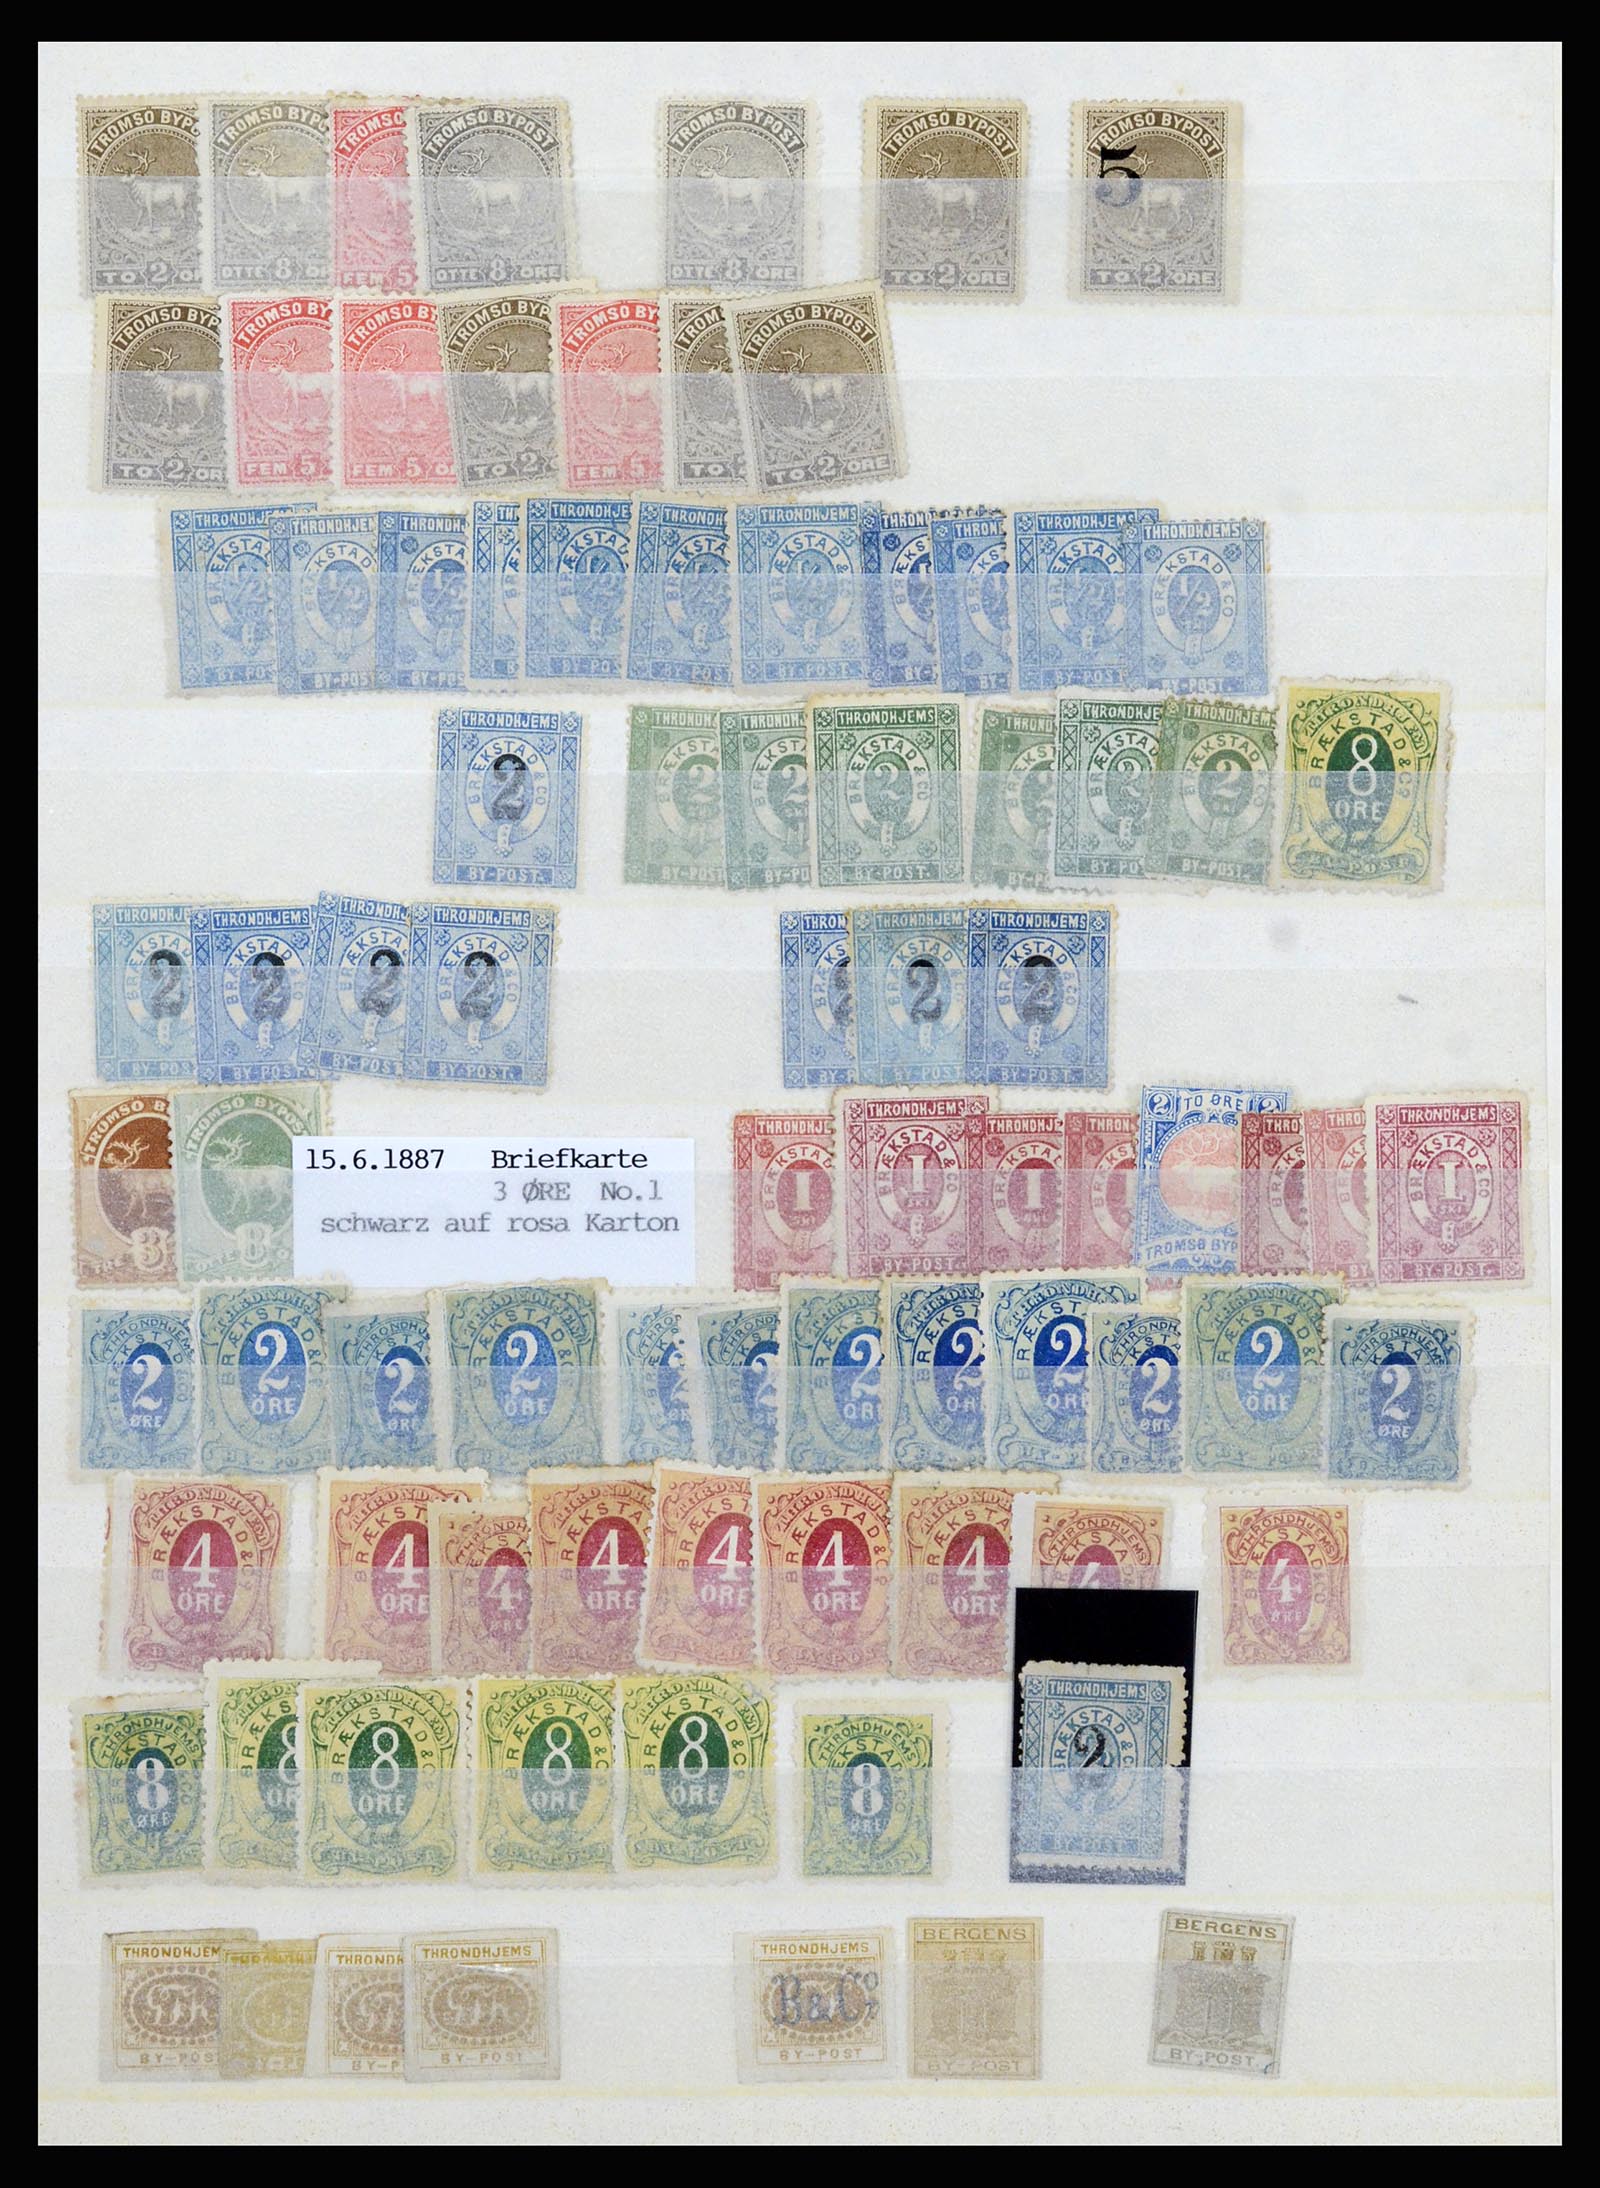 37139 011 - Stamp collection 37139 Norway local post 1875-1897.